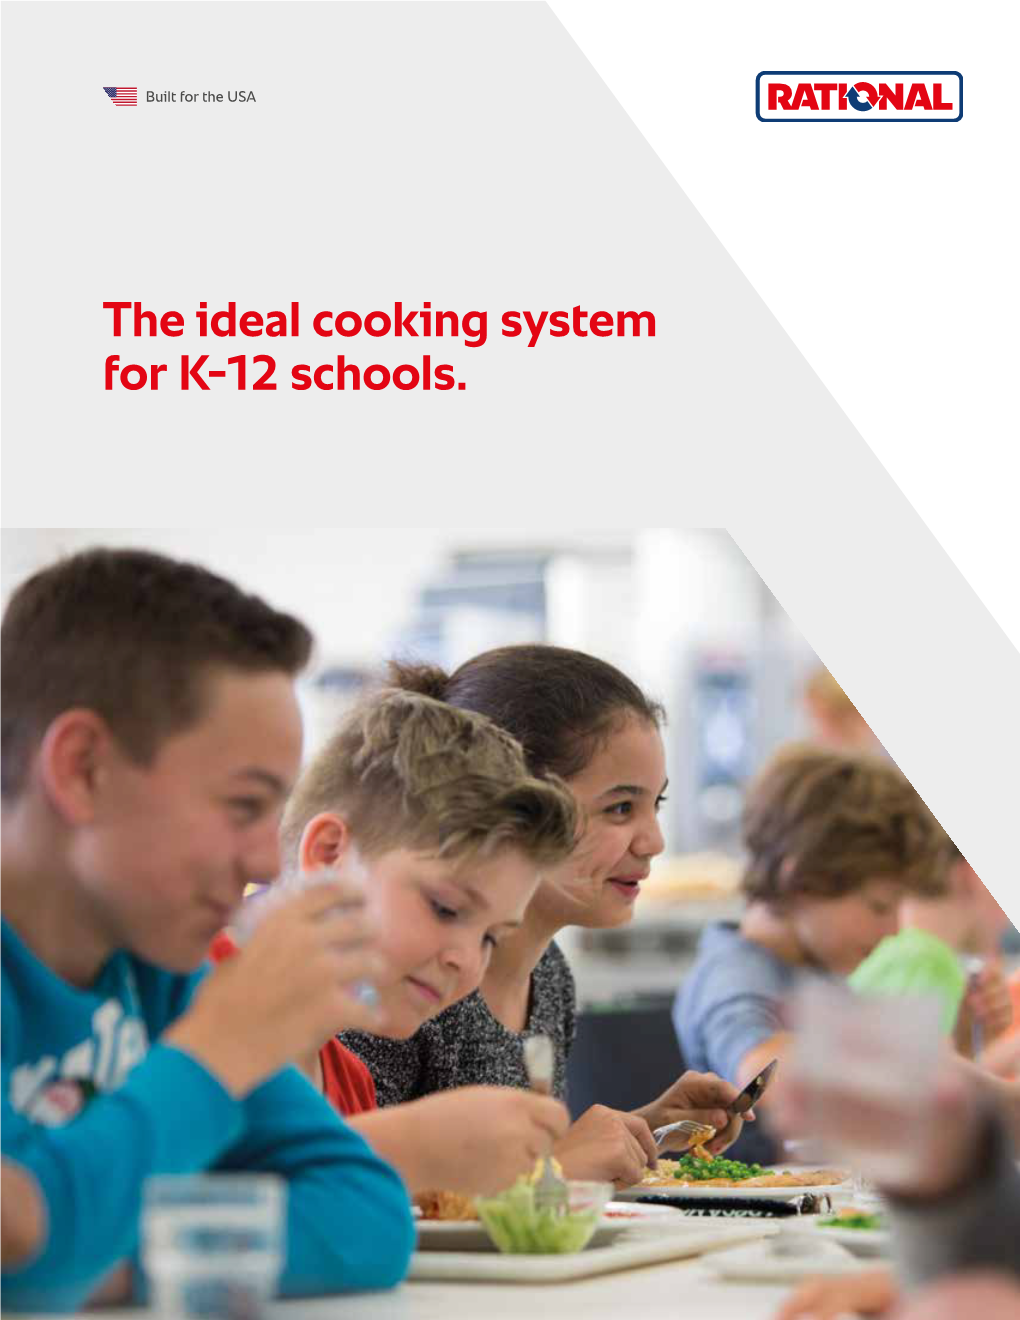 The Ideal Cooking System for K-12 Schools. Ideas Change the World